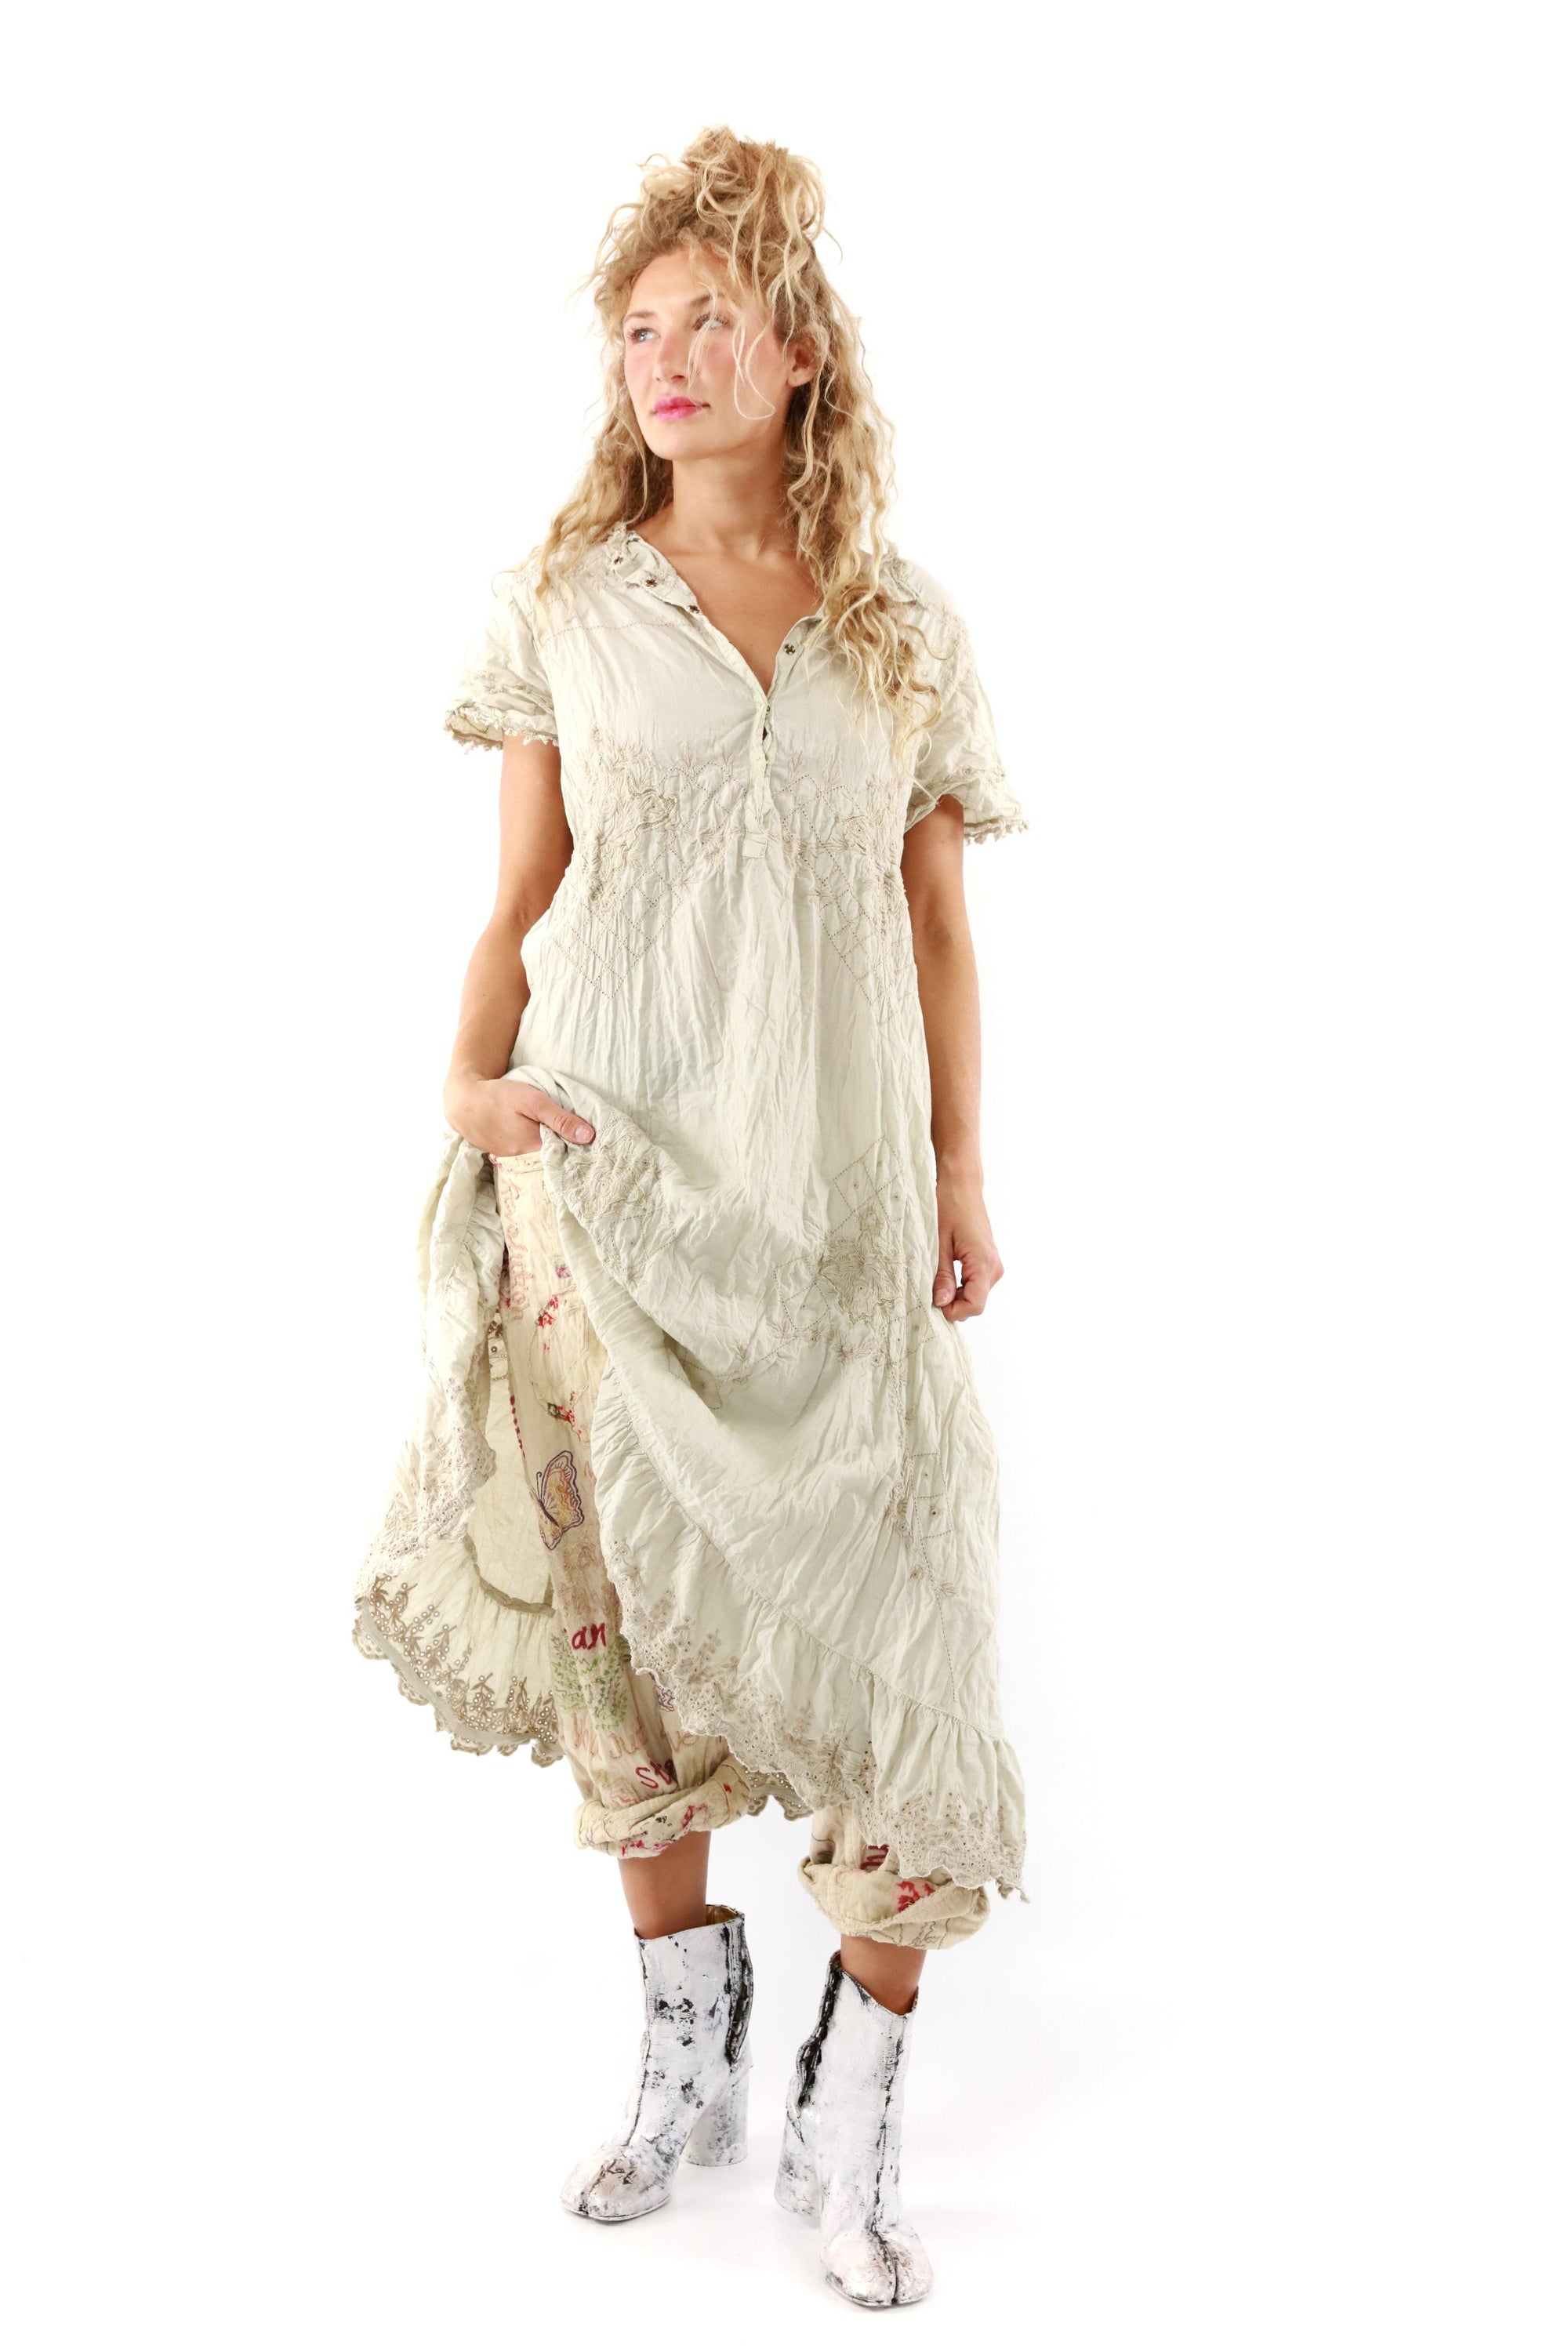 Anna Grace Embroidered Dress - Magnolia Pearl Clothing